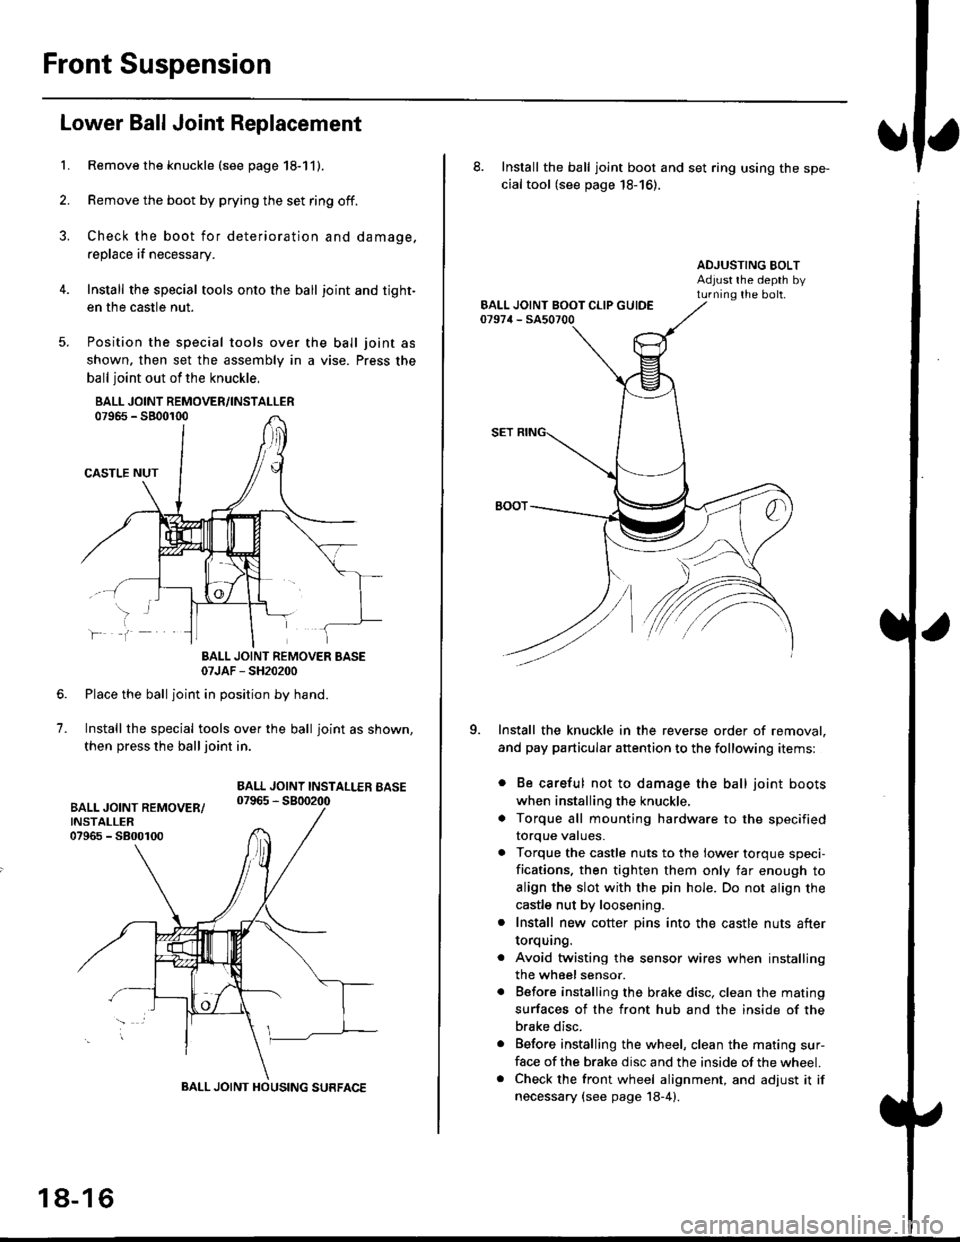 HONDA CIVIC 1996 6.G User Guide Front Suspension
L
Lower Ball Joint Replacement
Remove the knuckle (see page 18-11).
Remove the boot by prying the set ring off.
Check the boot for deterioration and damage.
replace if necessary.
Inst